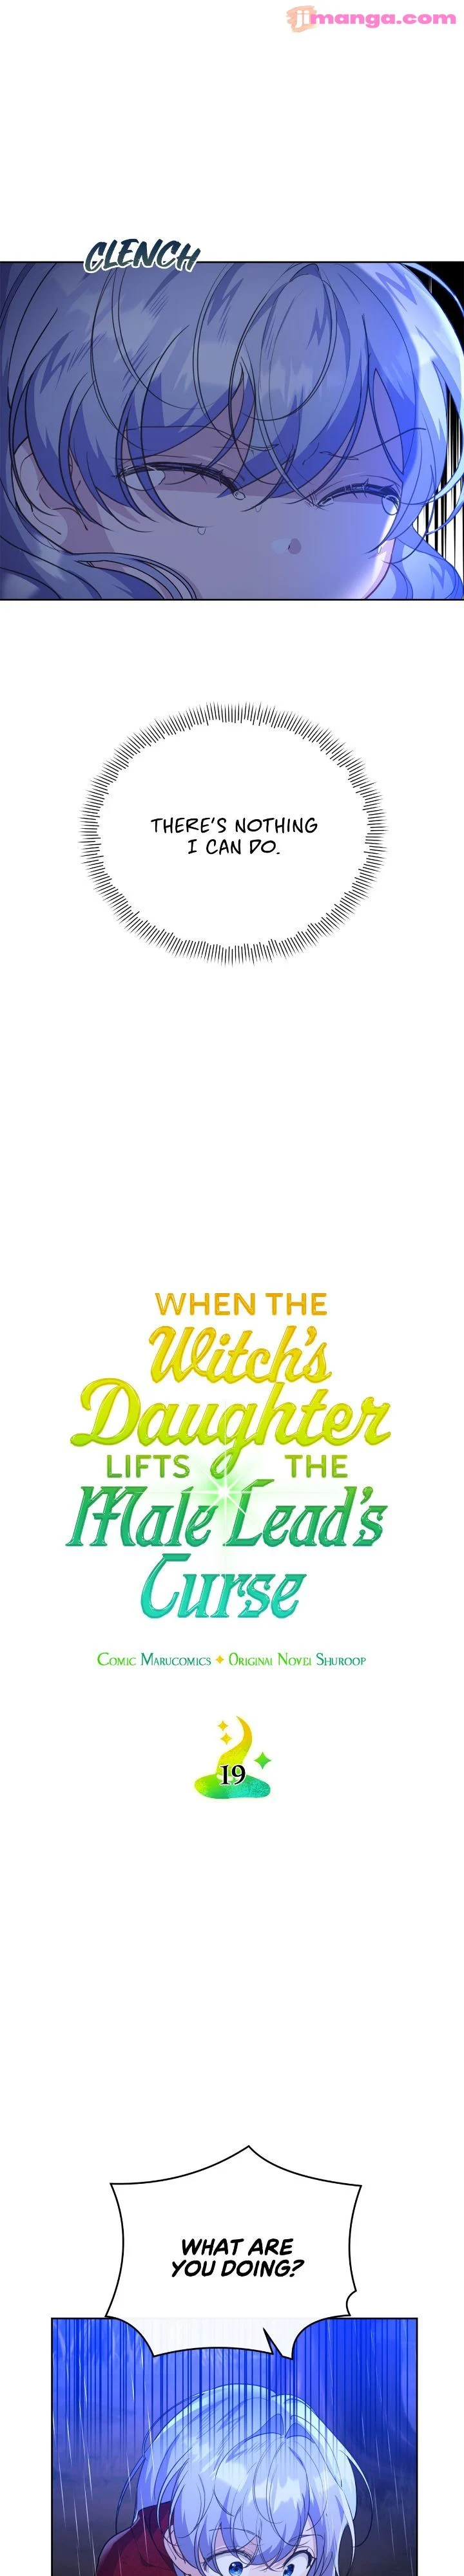 When the Witch’s Daughter Lifts the Male Lead’s Curse Chapter 19 - Page 13